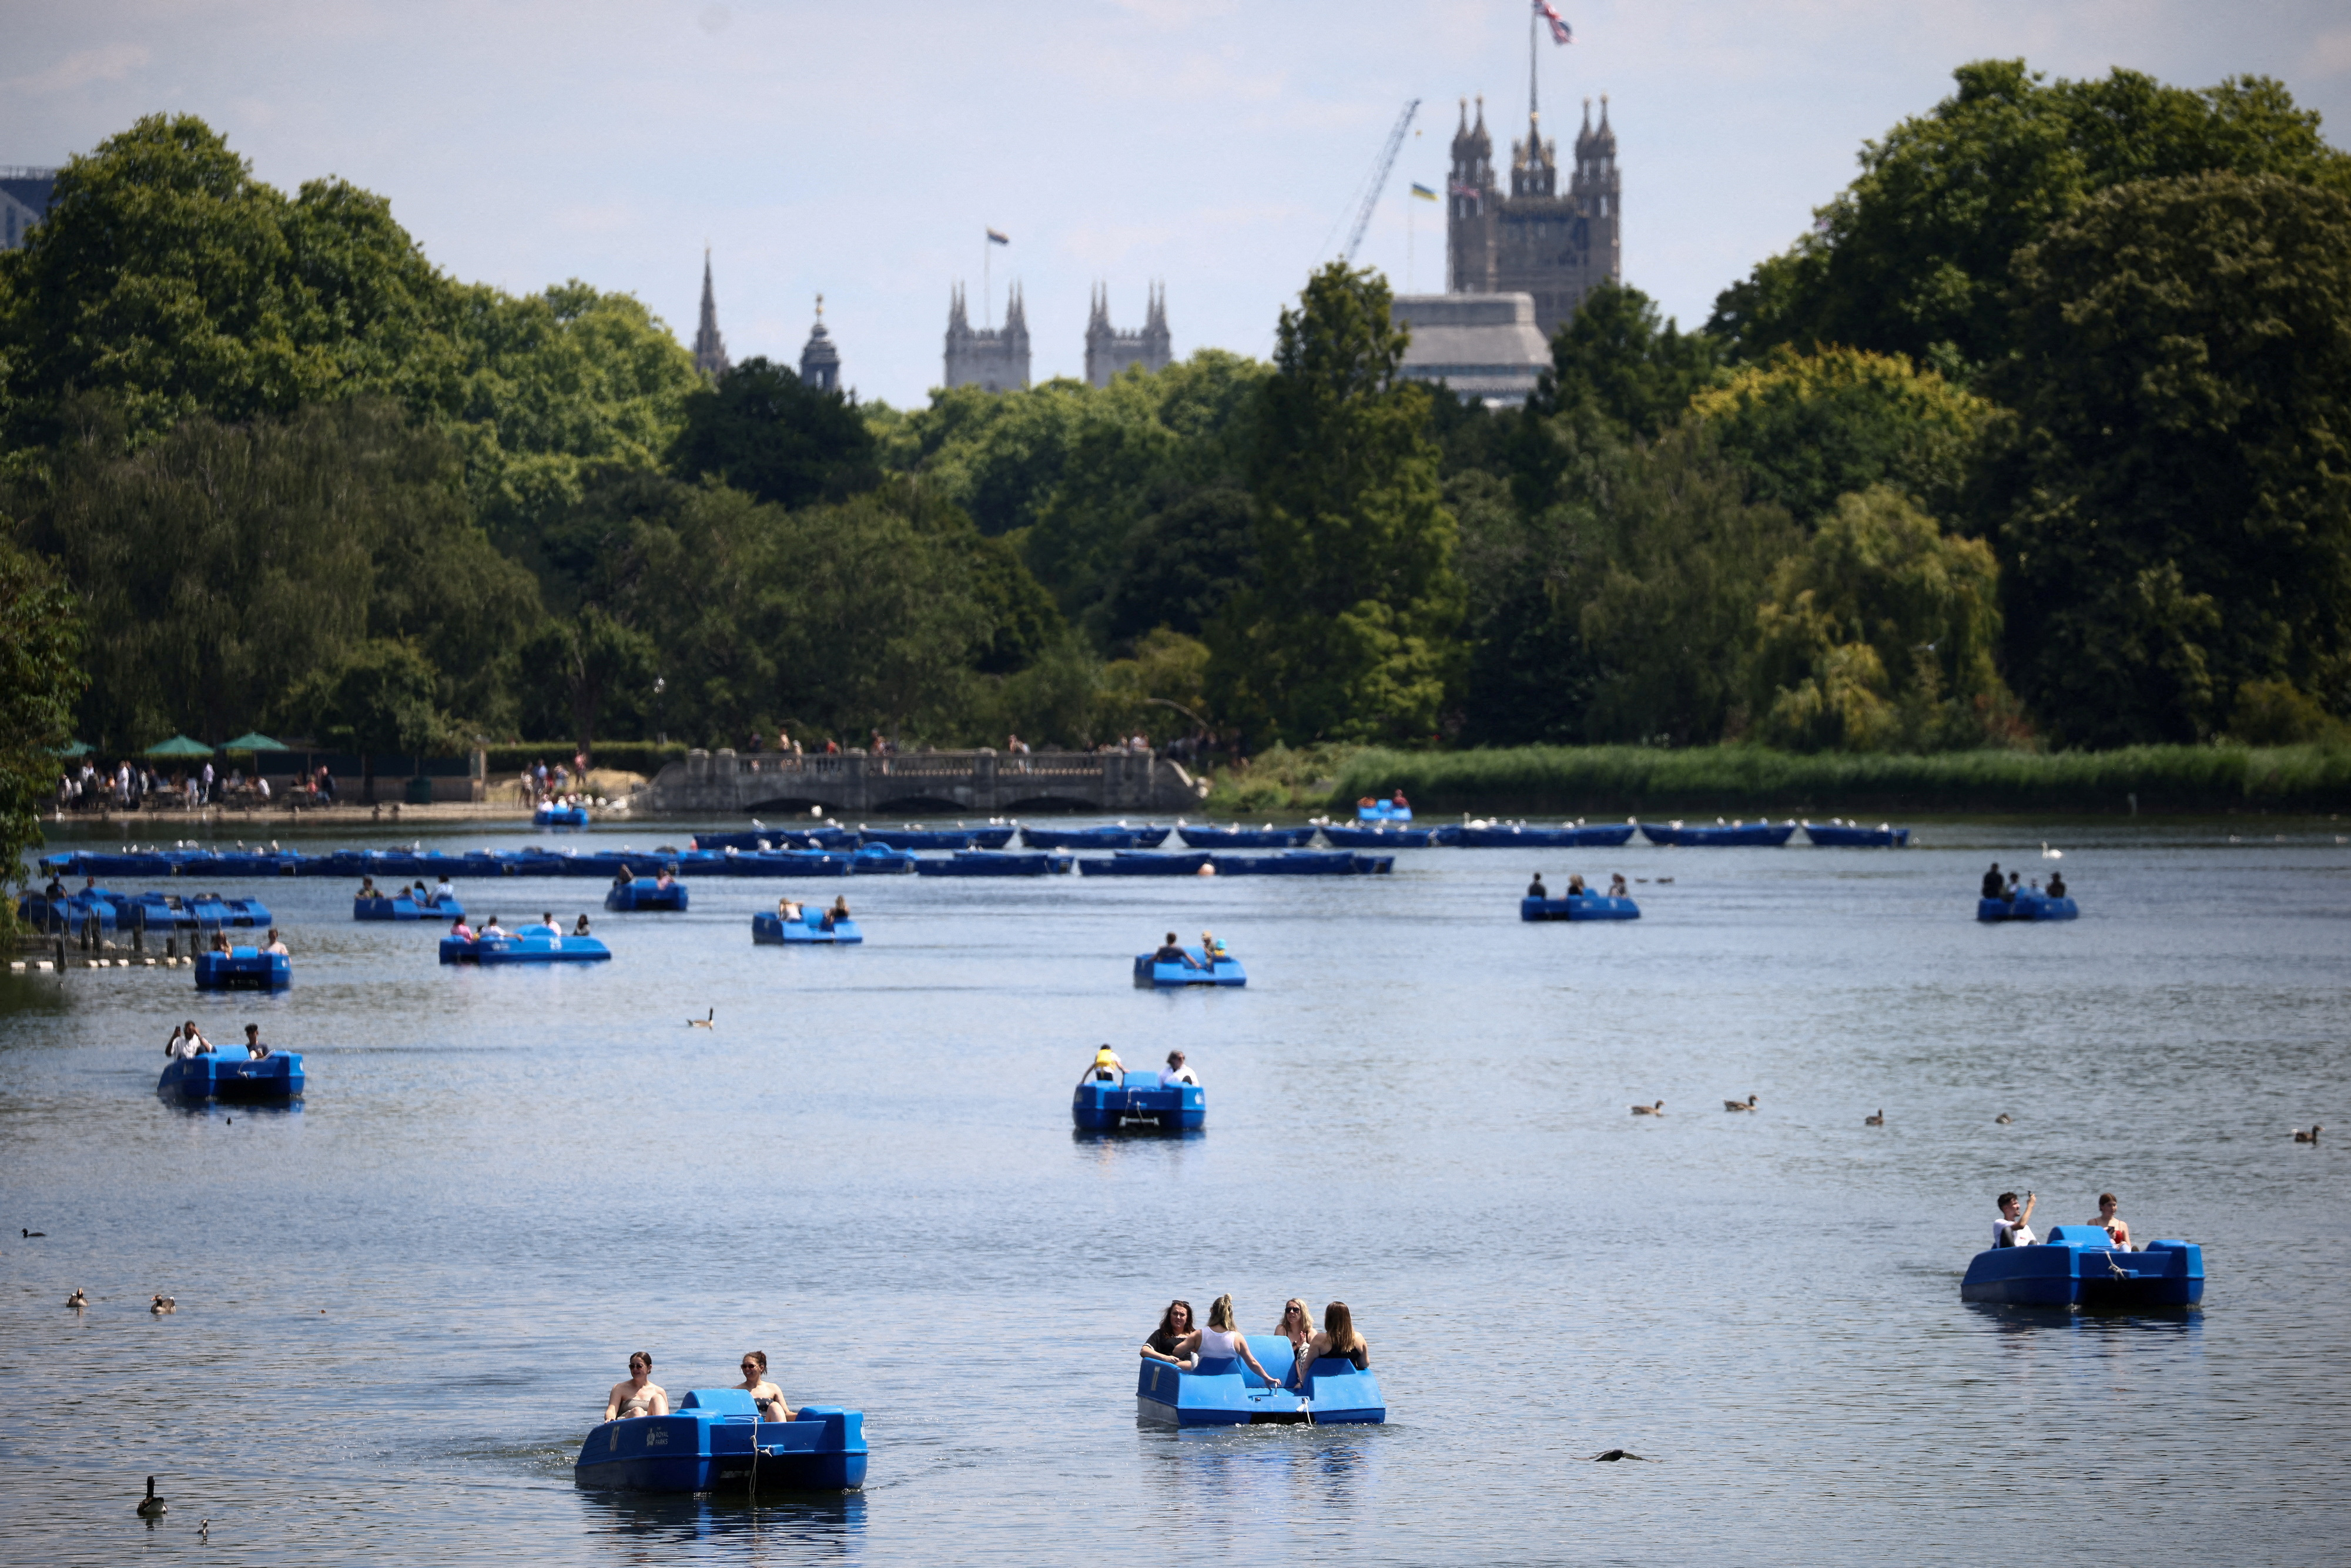 People ride pedal boats on the Serpentine Lake in Hyde Park, during warm weather in London